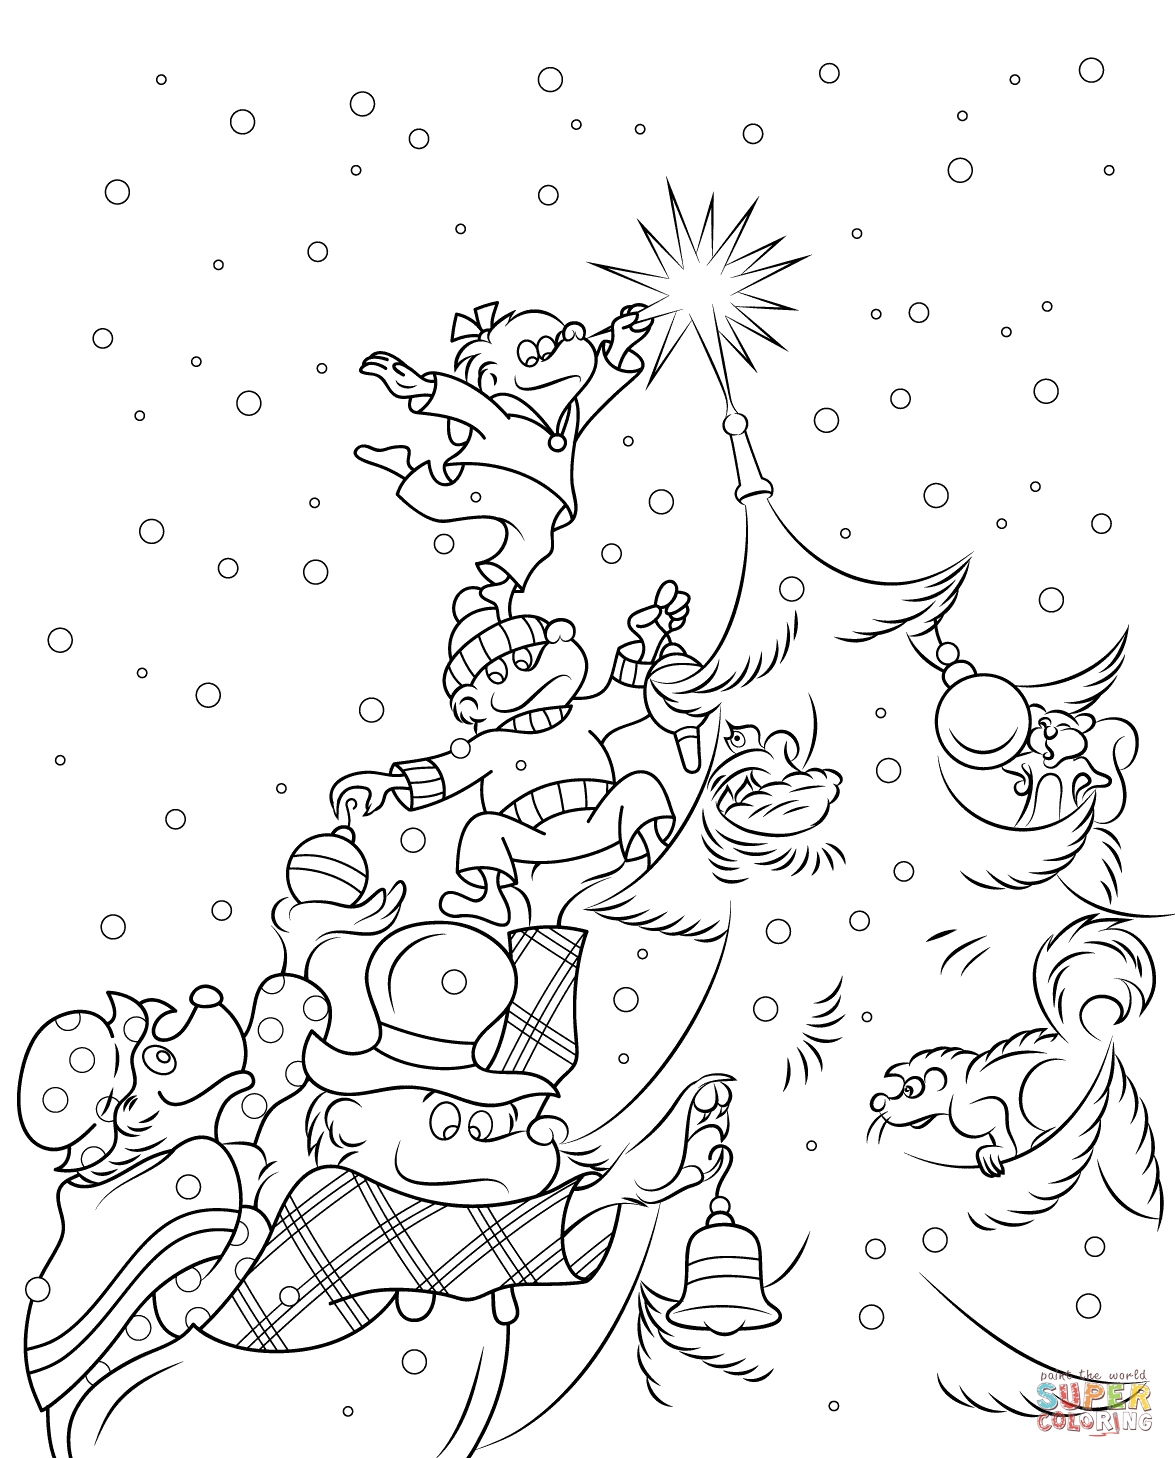 The Berenstain Bears Christmas Tree coloring page | Free Printable